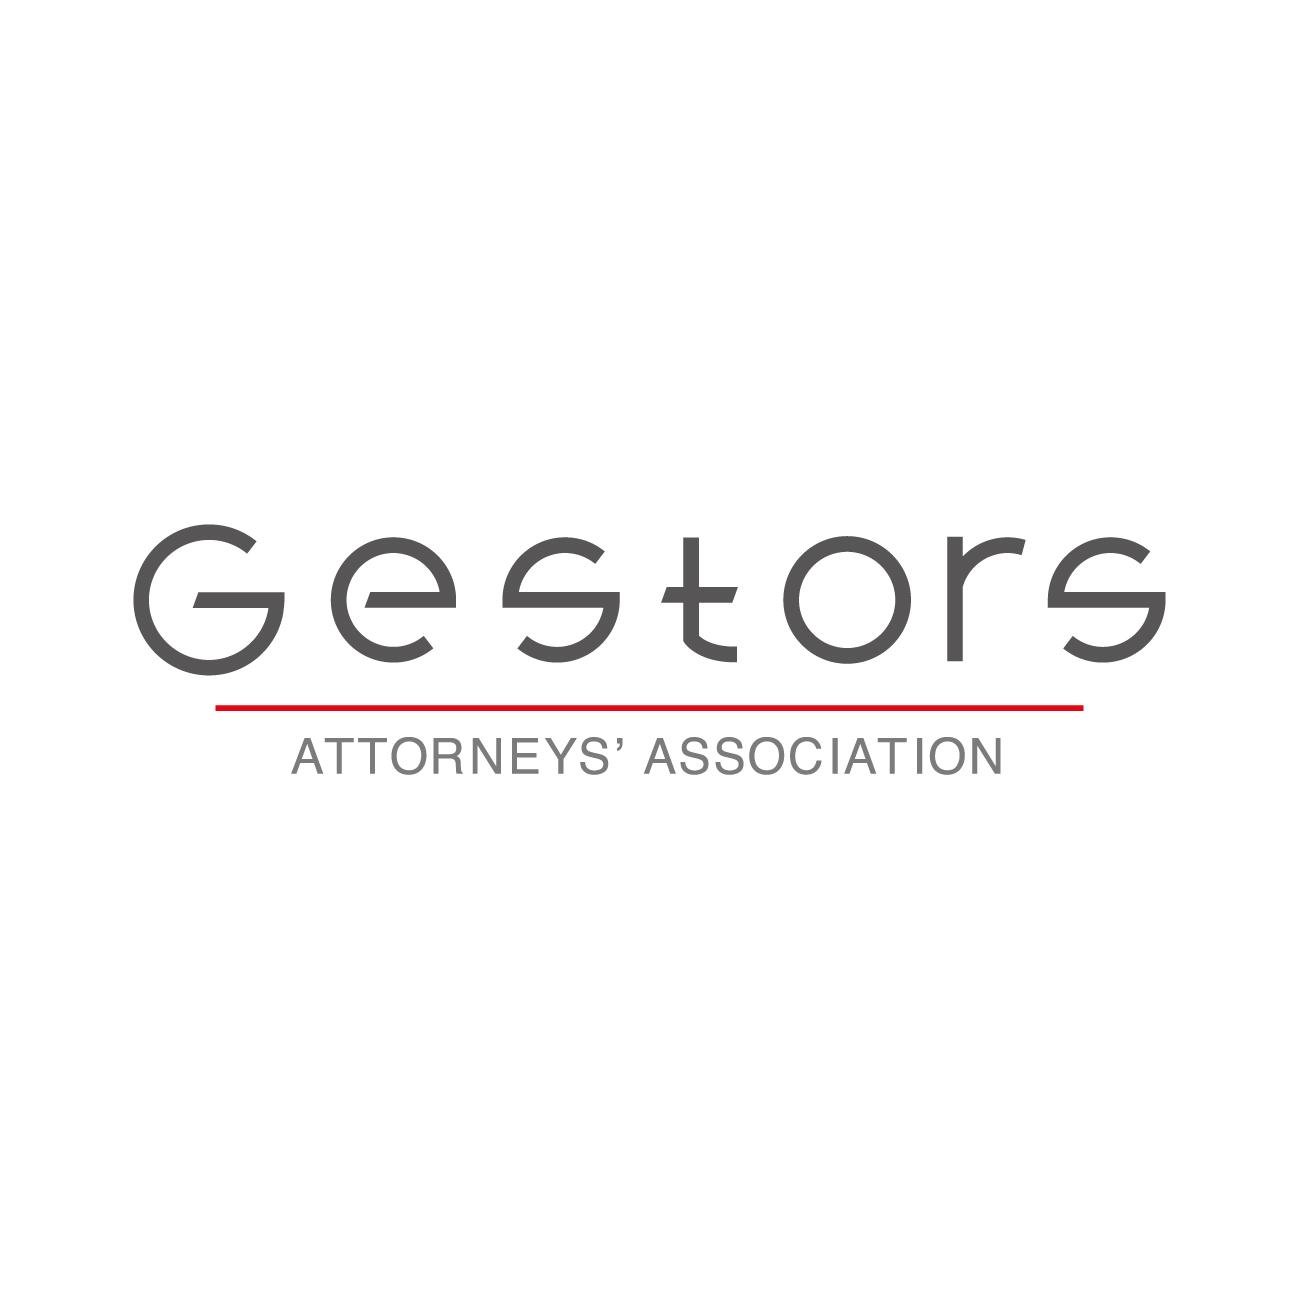 Attorneys’ Association Gestors is a full service, general practice law firm focused on corporate and commercial law, M&A, arbitration and litigation.